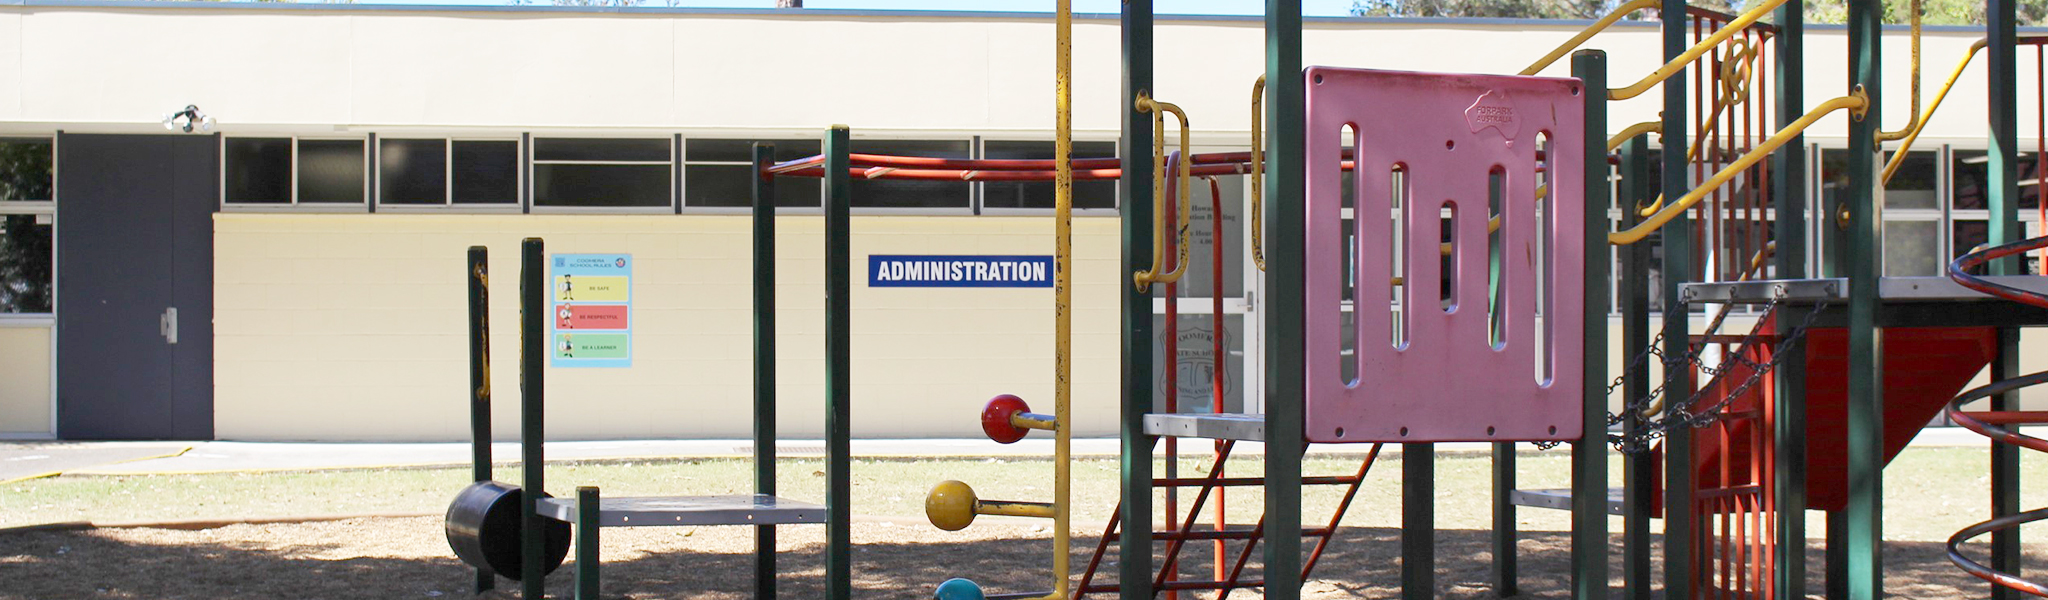 Playground and Admin building